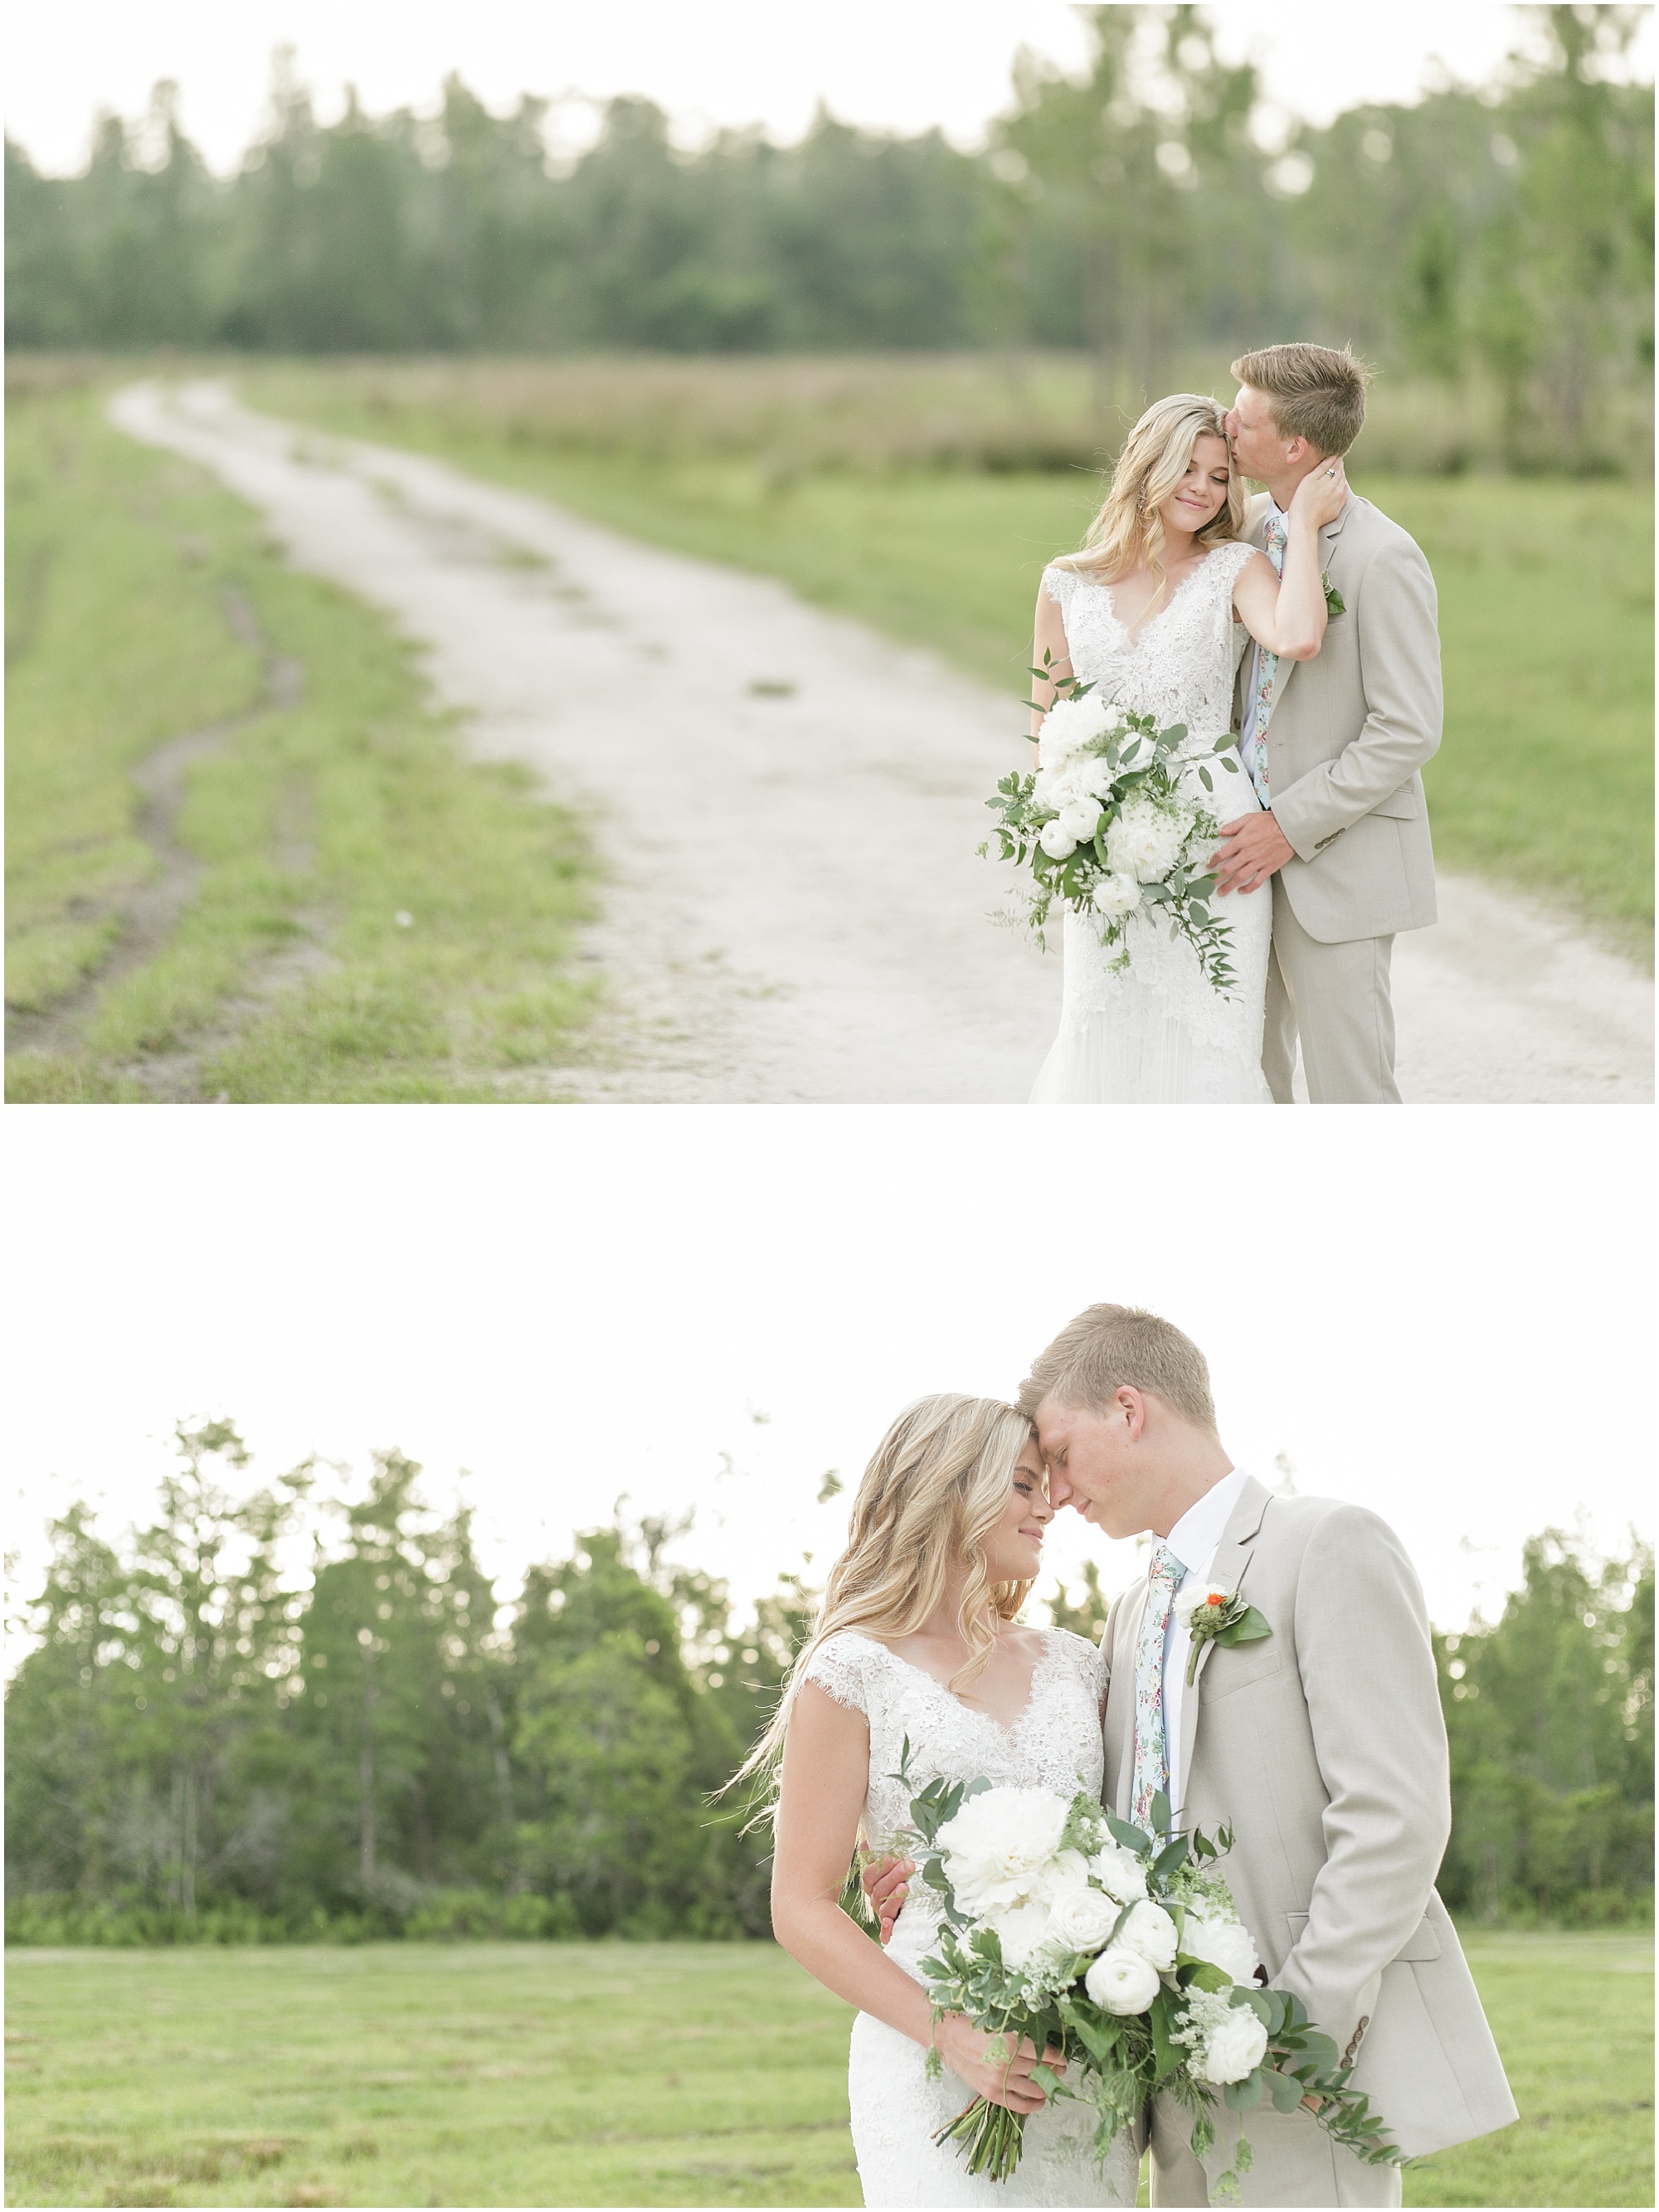 Bride and groom taking close up photos on a dirt road.